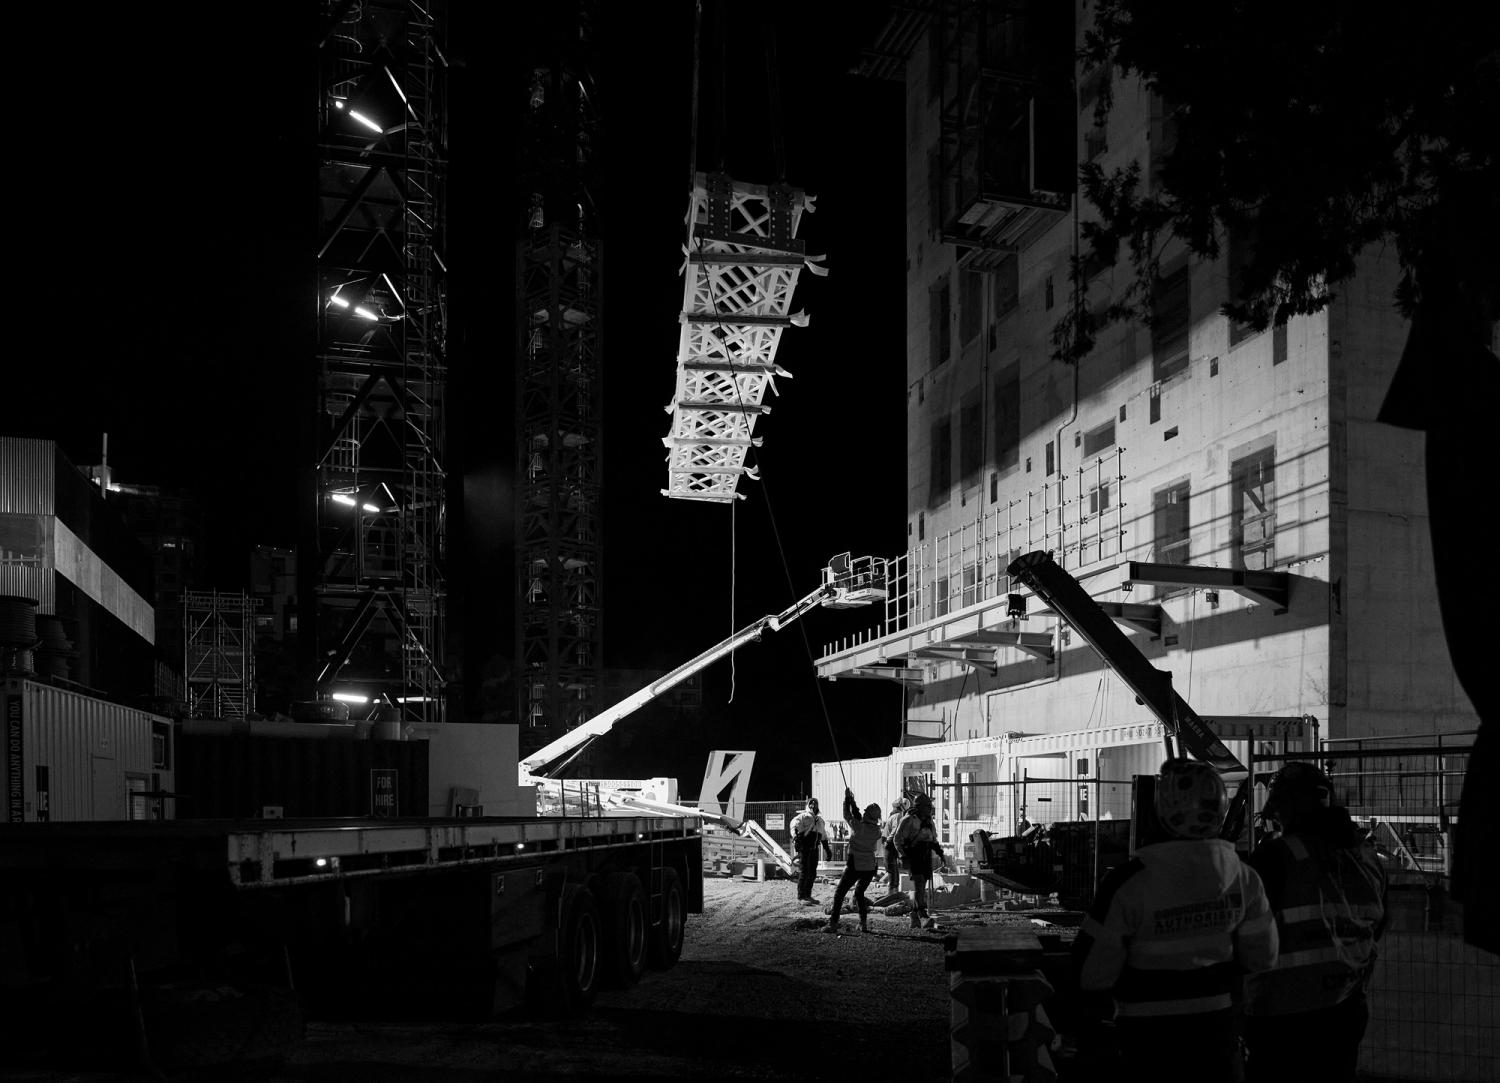 Construction crew working with a crane lifting a heavy frame at night